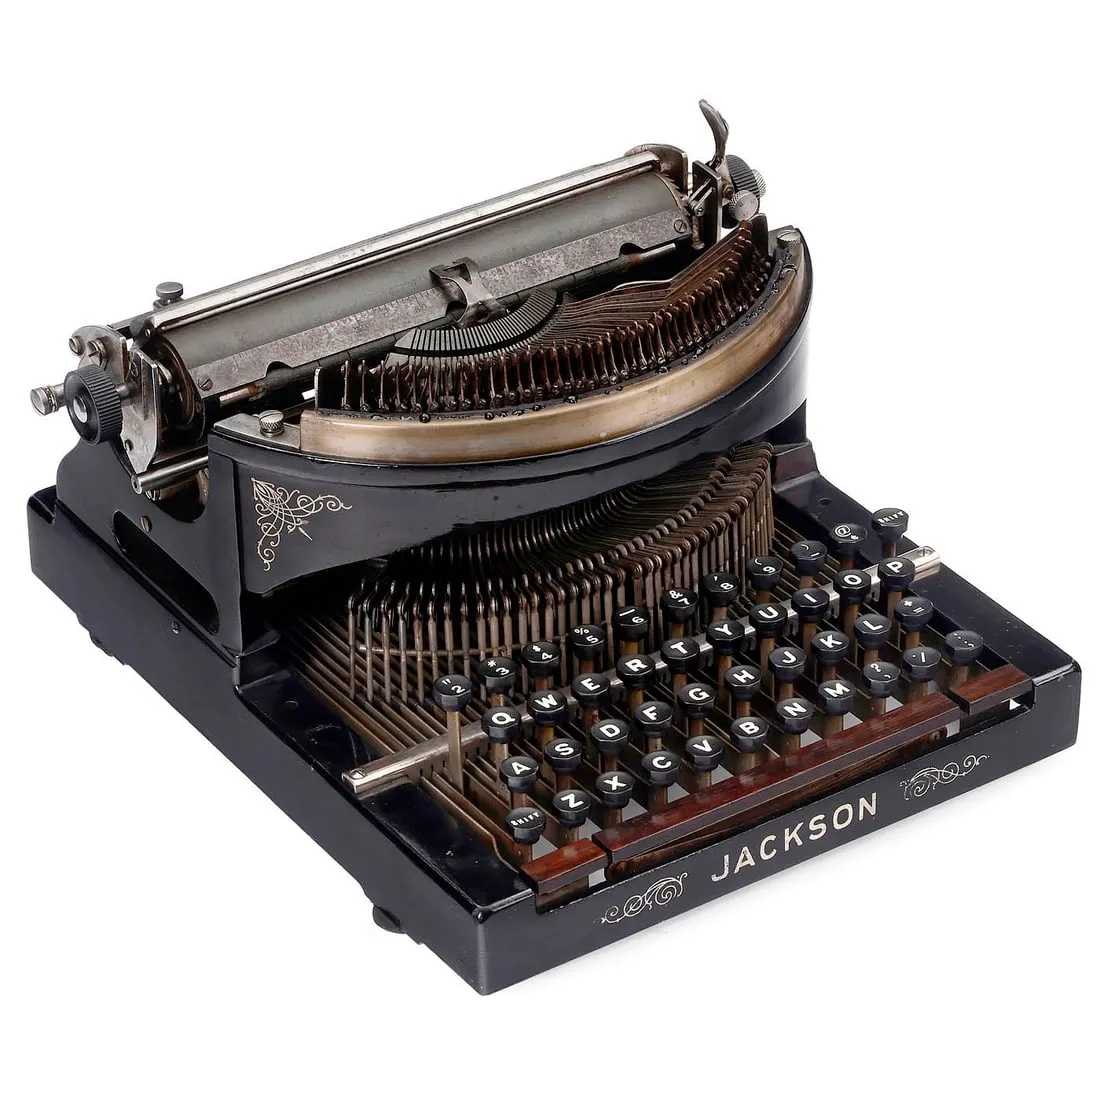 Antique typewriters hammered out big numbers at Auction Team Breker